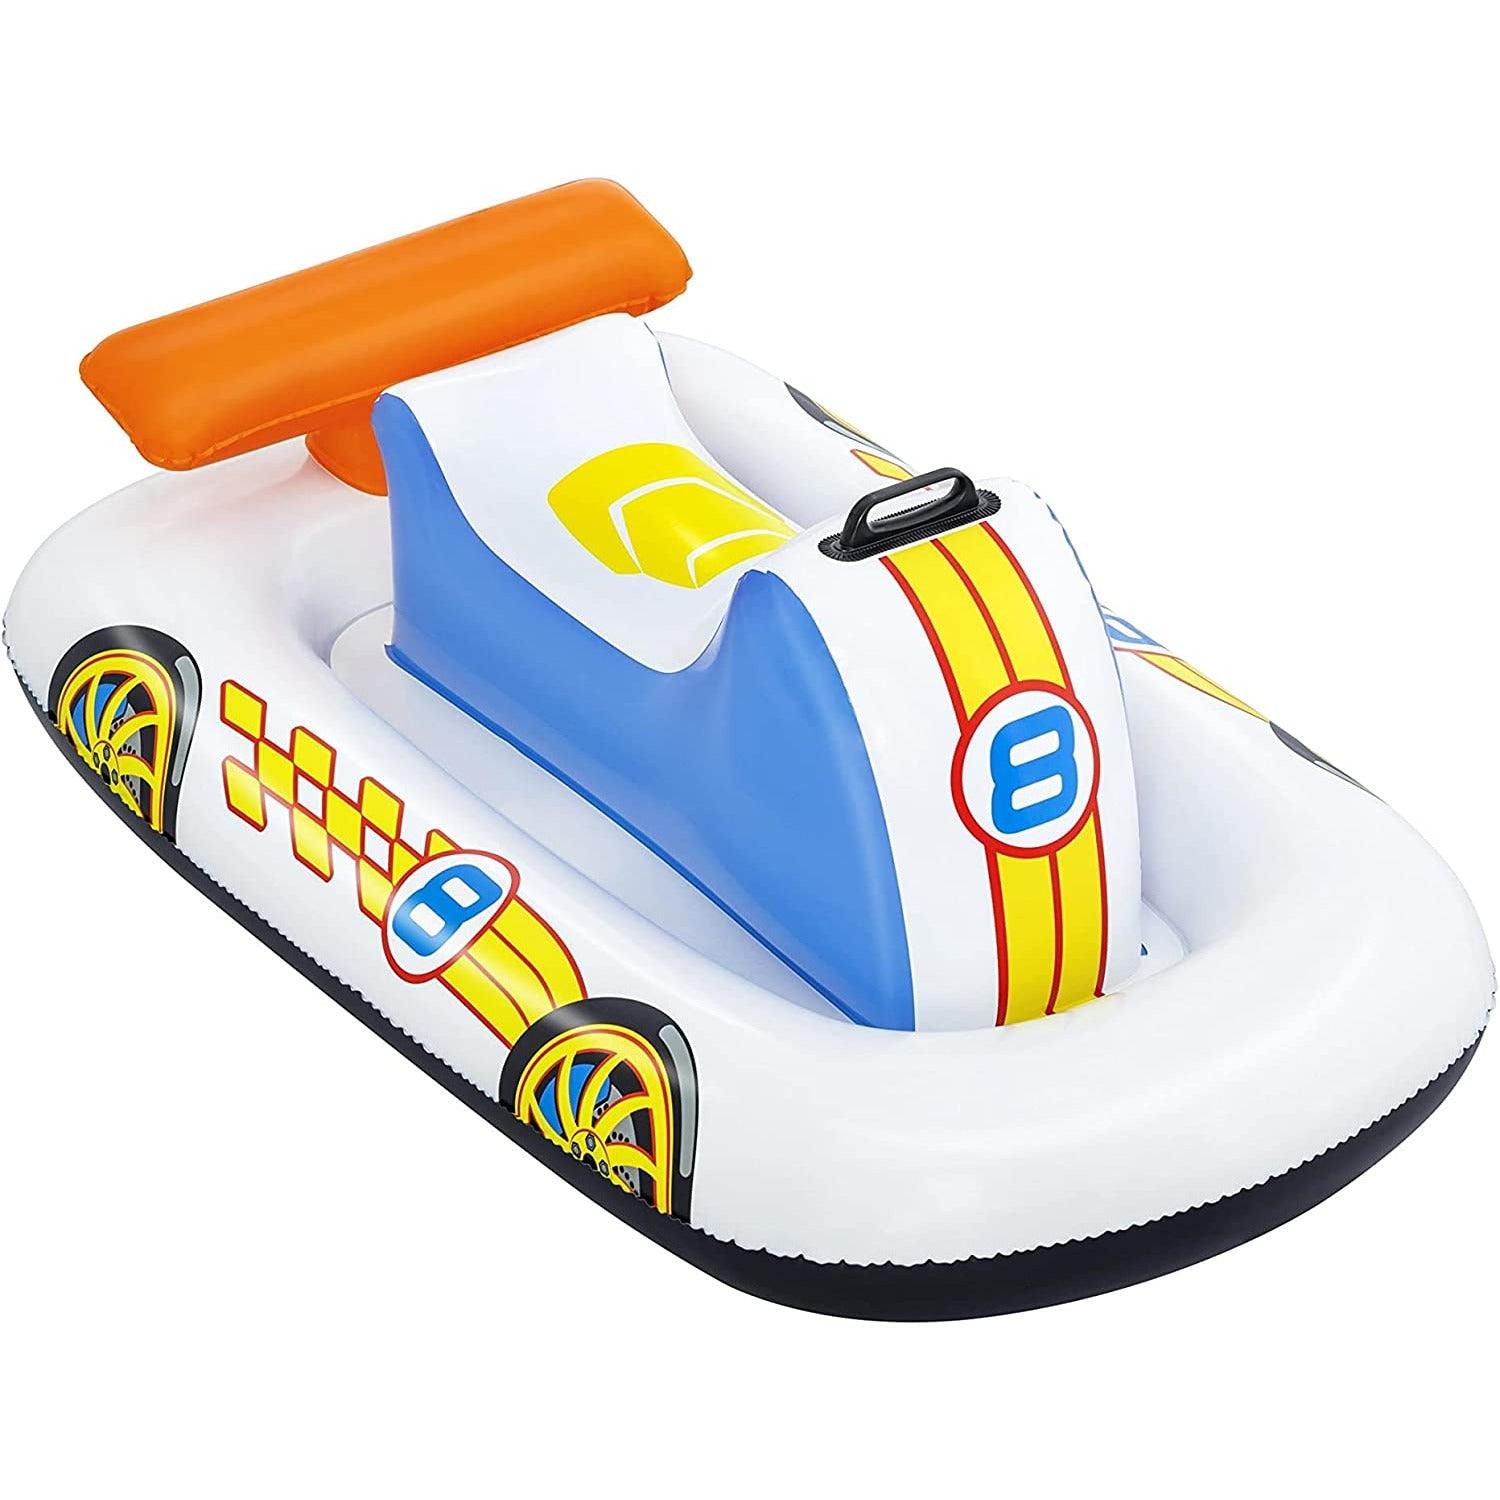 Bestway 41480 Sports Car Ride-On 110X75Cm - BumbleToys - 5-7 Years, Bestway, Boys, Girls, Sand Toys Pools & Inflatables